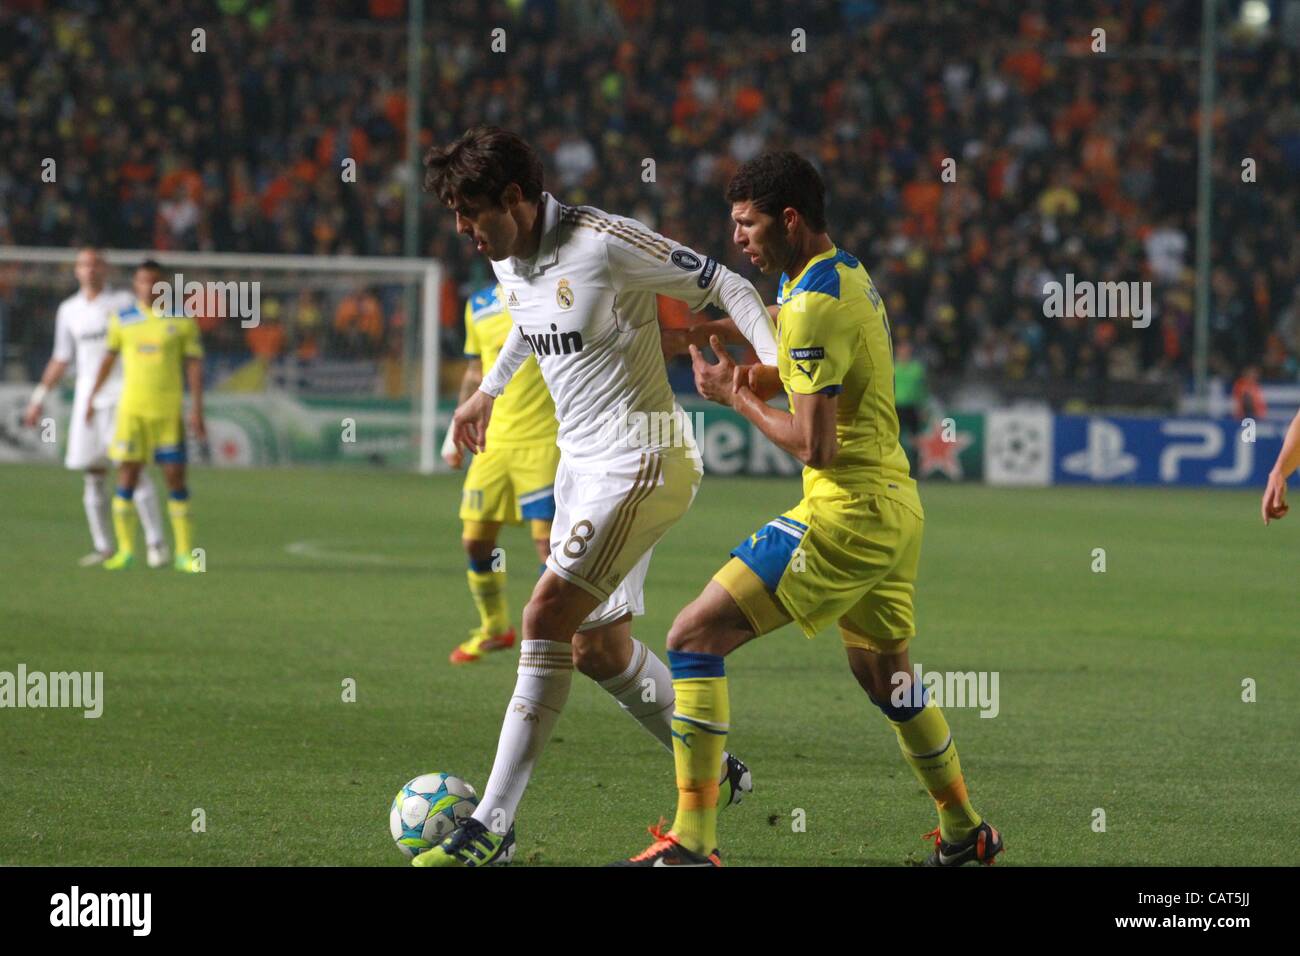 Kaka and Paolo Jorge during the UEFA Champions League quarter final match between Apoel and Real Madrid at GSP stadium on 27th of March in Nicosia, Cyprus Stock Photo